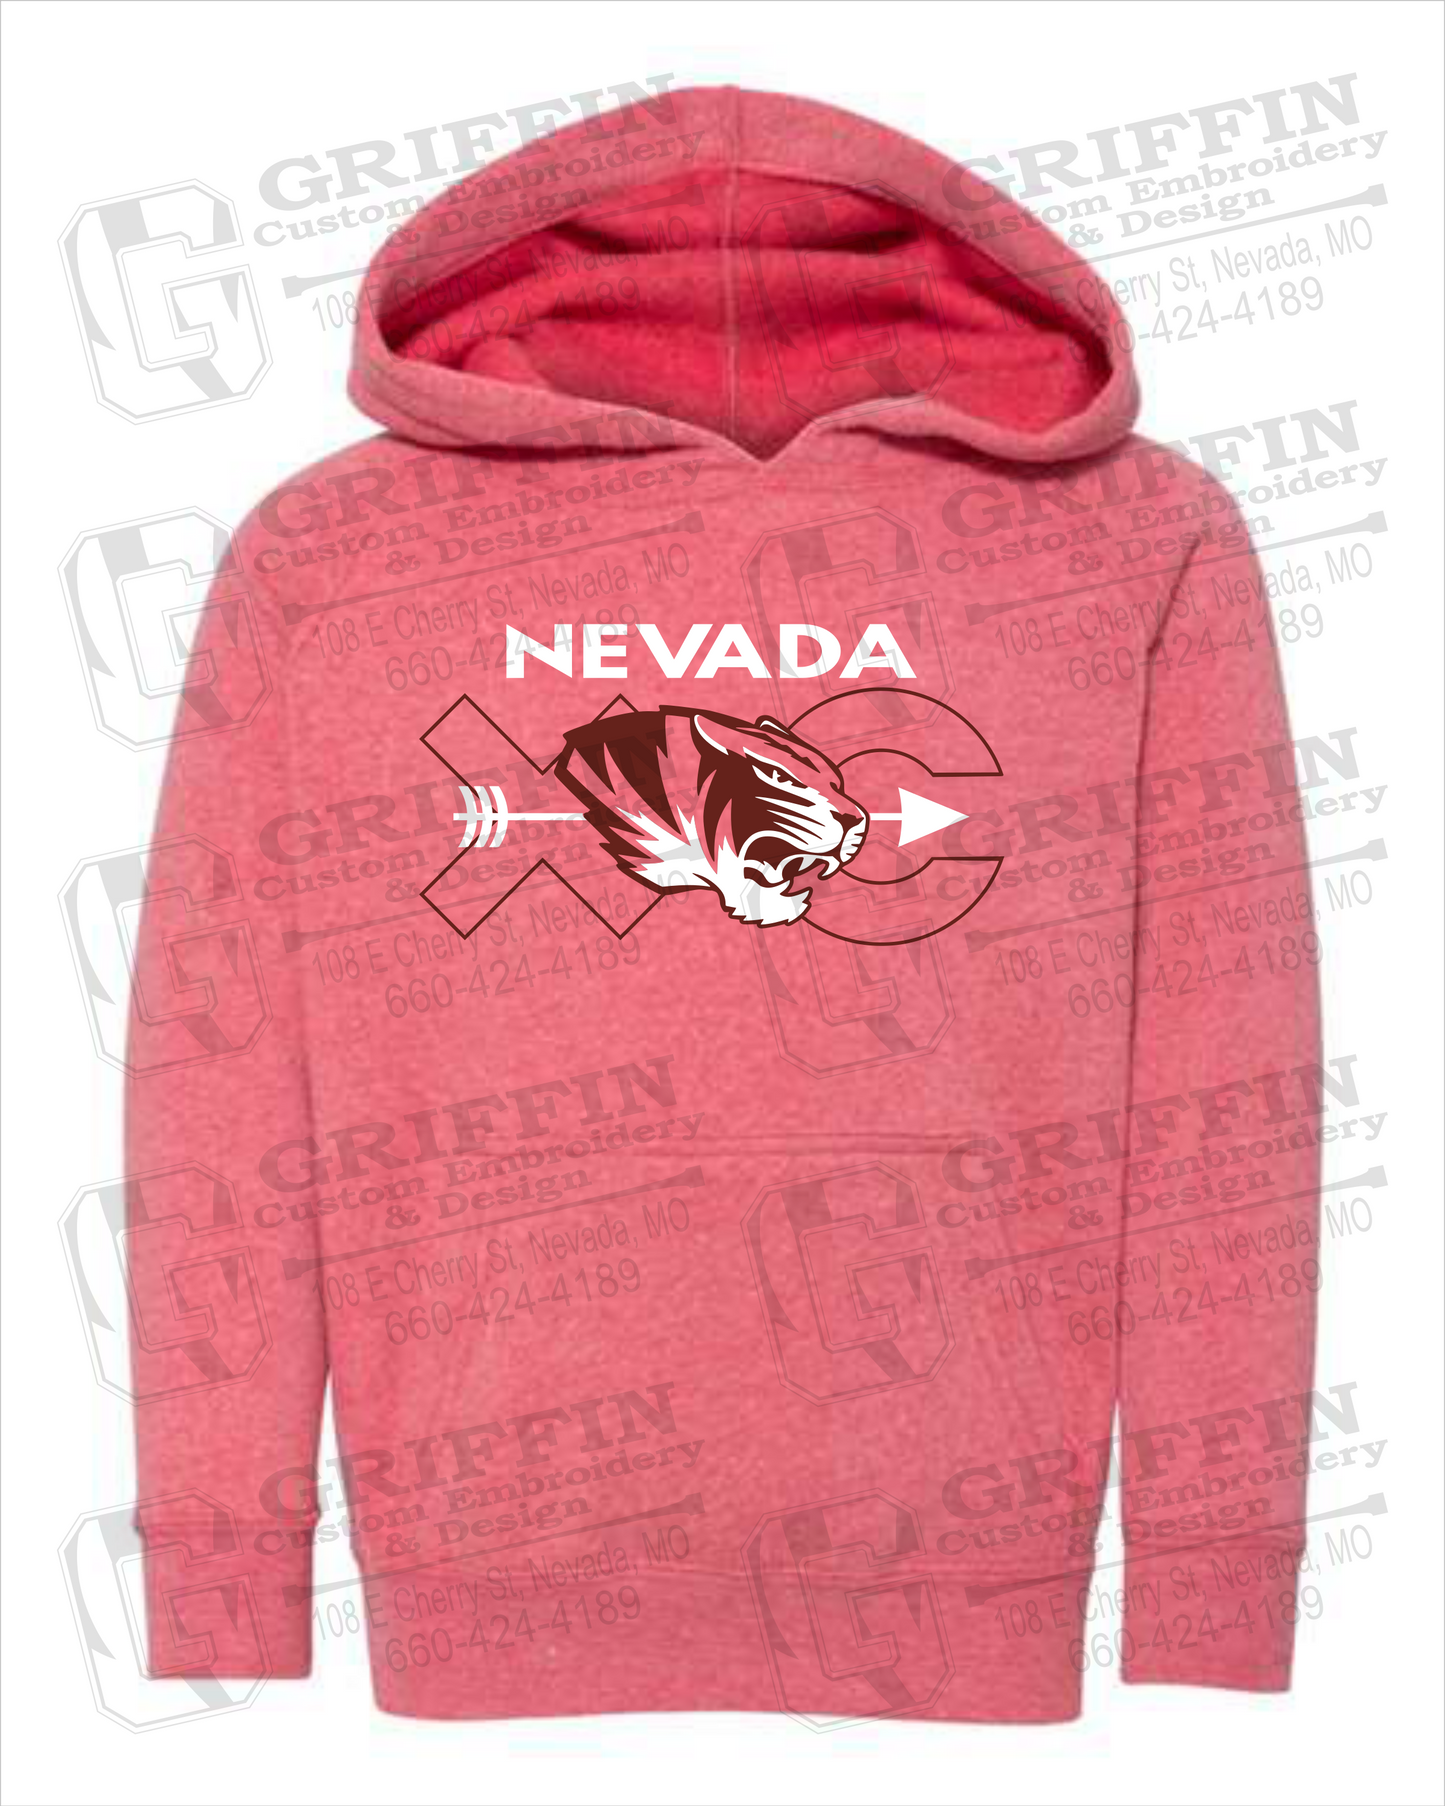 Nevada Tigers 23-T Toddler Hoodie - Cross Country